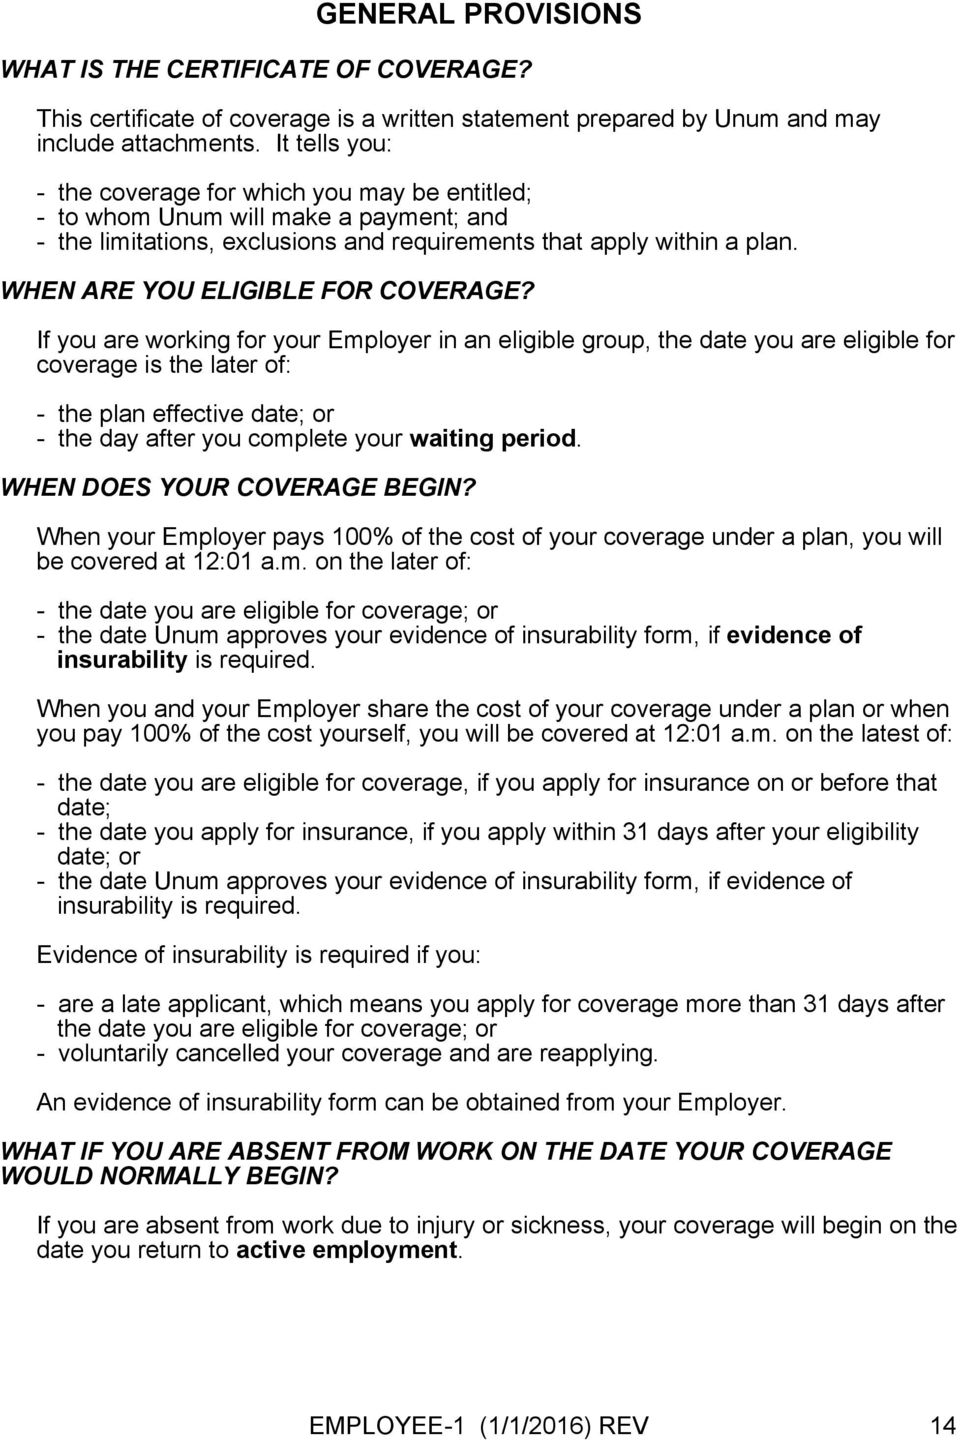 WHEN ARE YOU ELIGIBLE FOR COVERAGE?